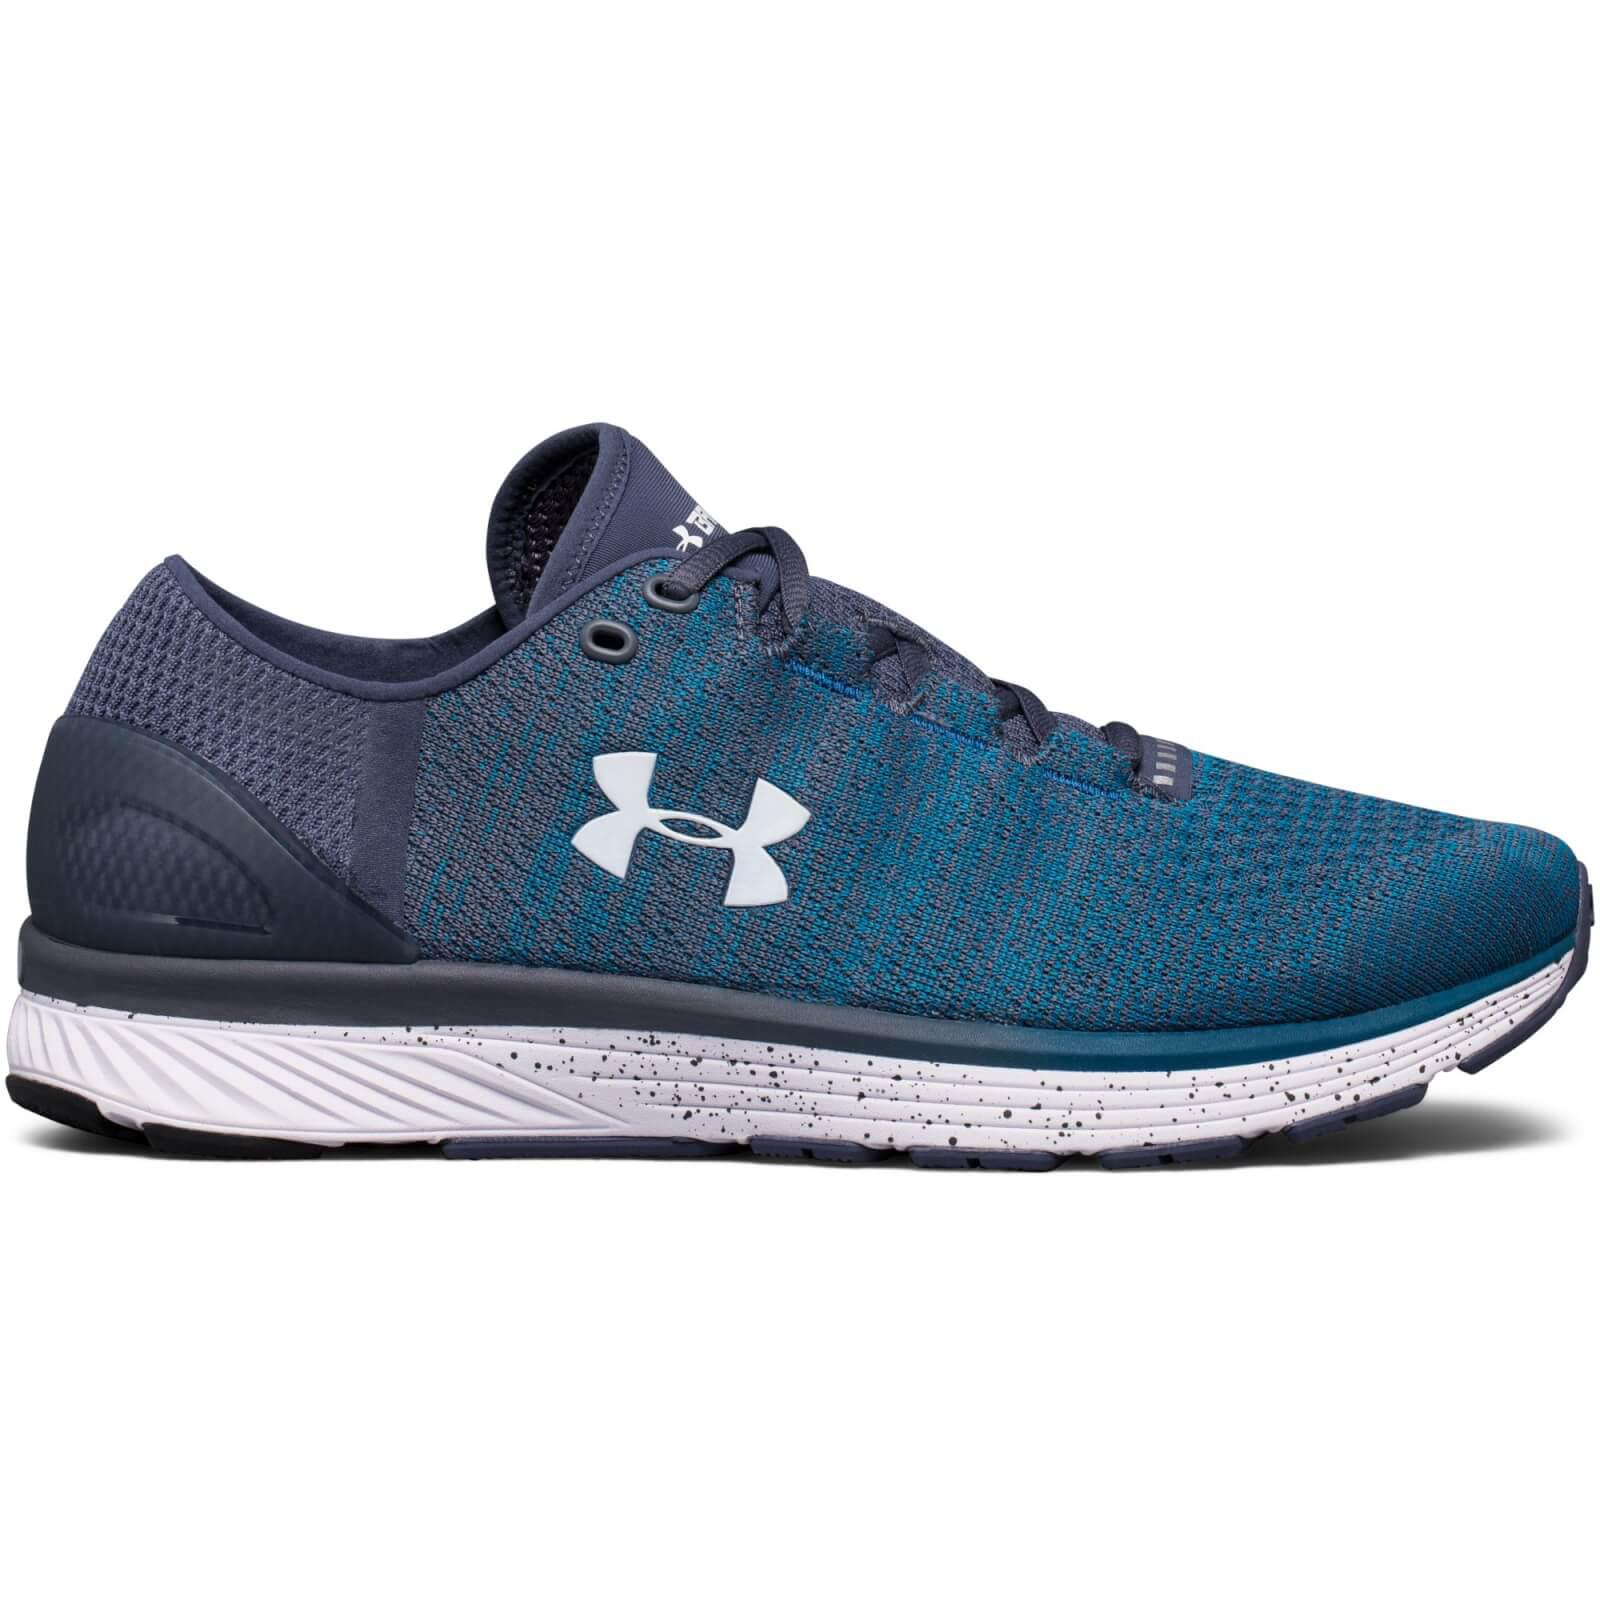 Under Armour Charged Bandit 3 Running Shoe in Blue for Men - Lyst